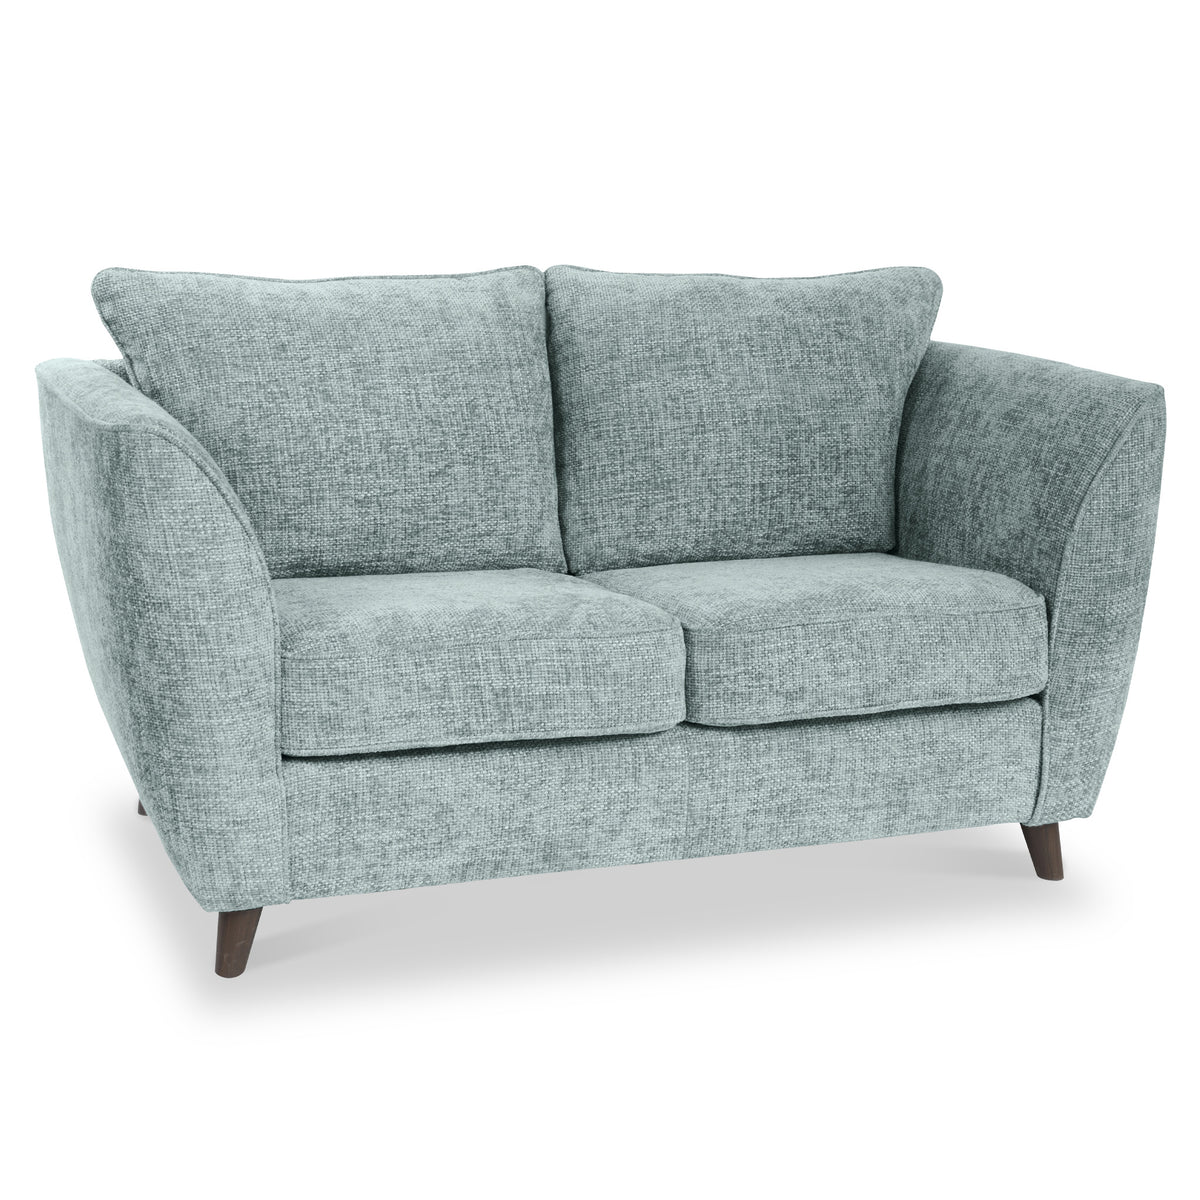 Tamsin Duck Egg 2 Seater Sofa from Roseland Furniture